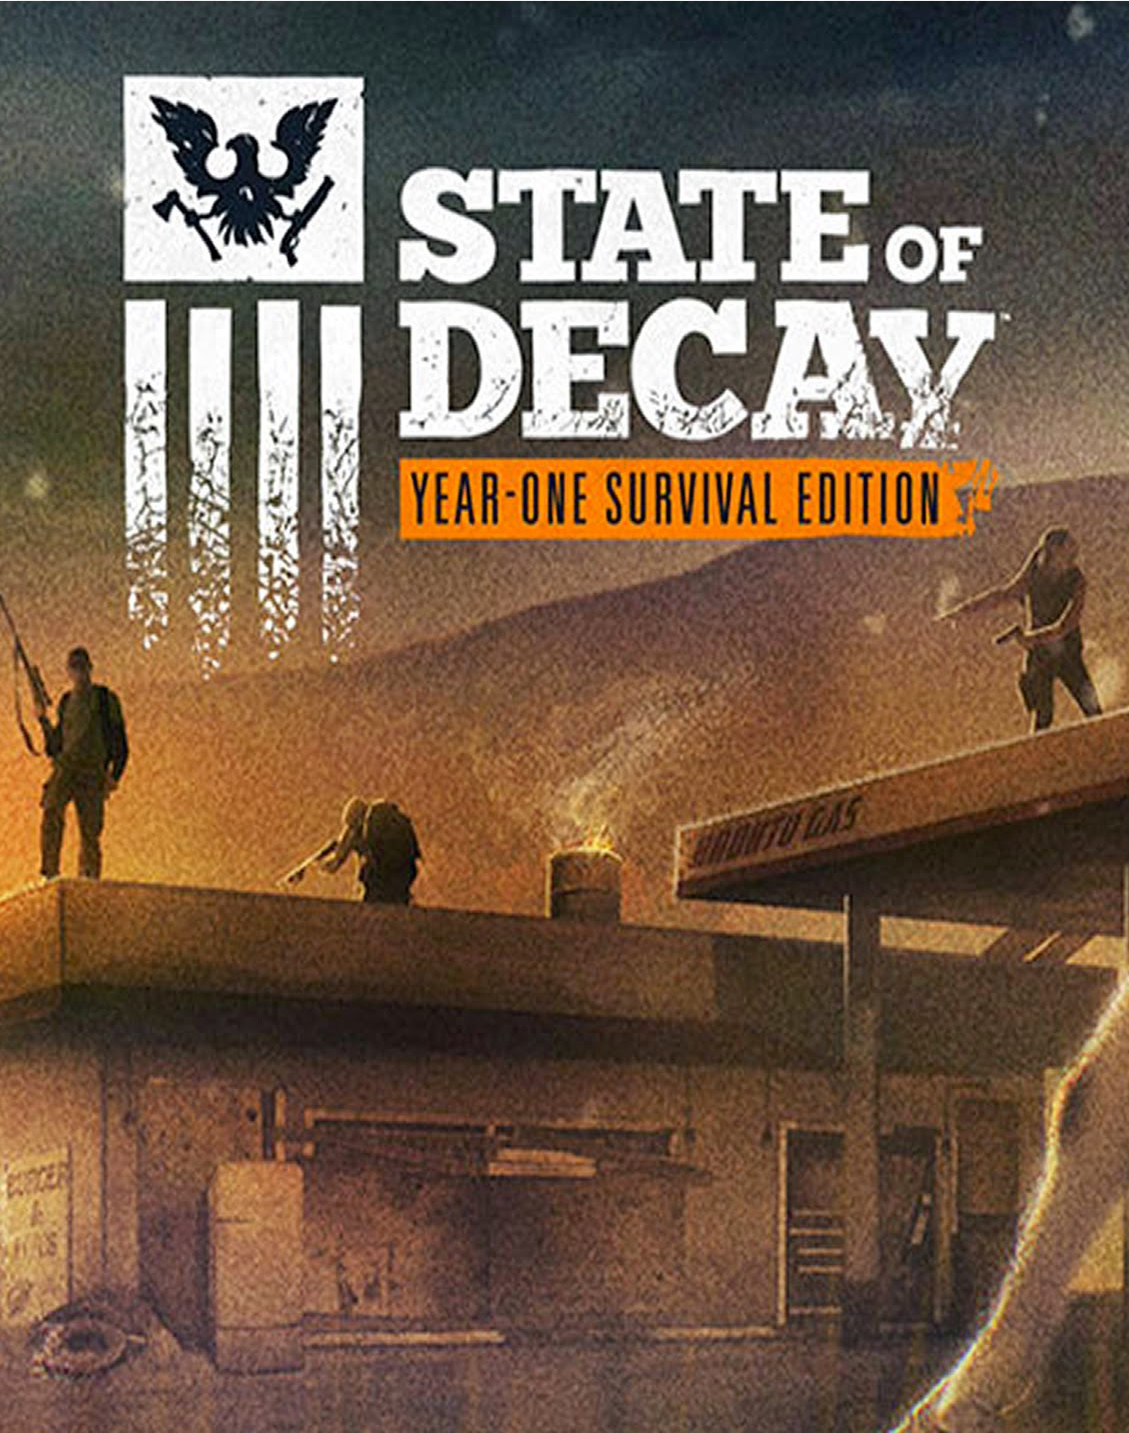 State of decay year one survival edition mods 3